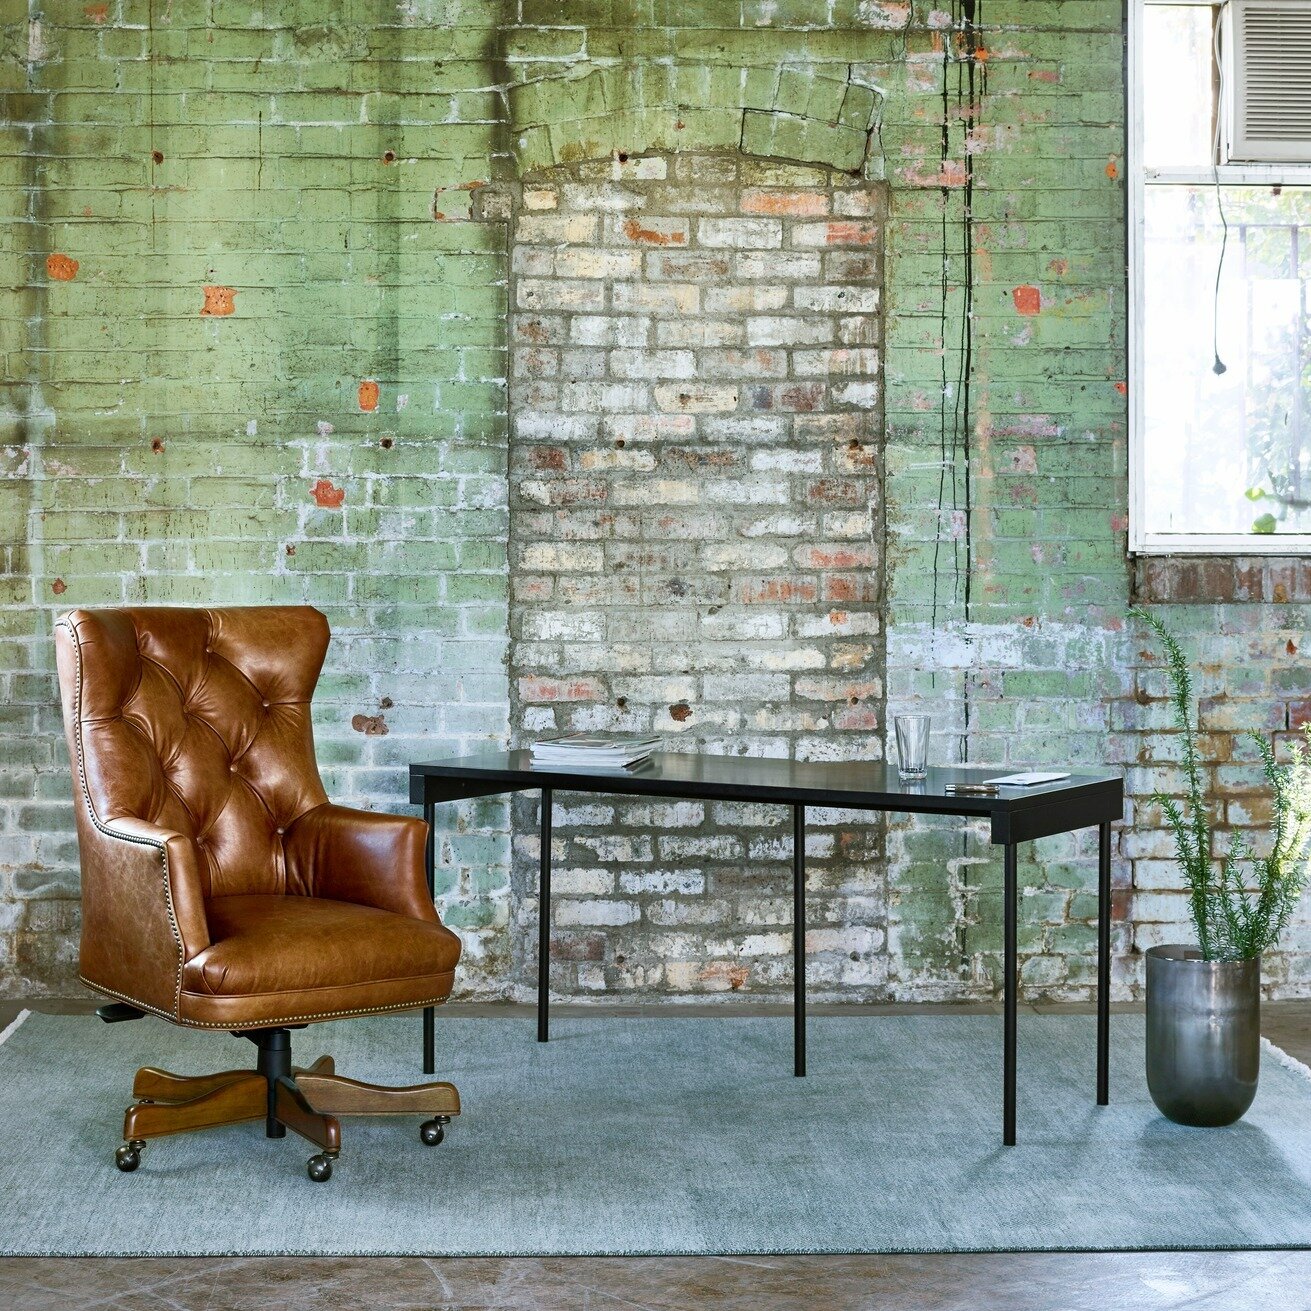 Warmth and Comfort | The Stewart Executive Chair's button-tufted back and gently scalloped wings create an elegantly contoured seat, poised atop a star base crafted from light walnut timber.⁠ 

#homeoffice #authenticleather #leatherchairs #hbandco #f